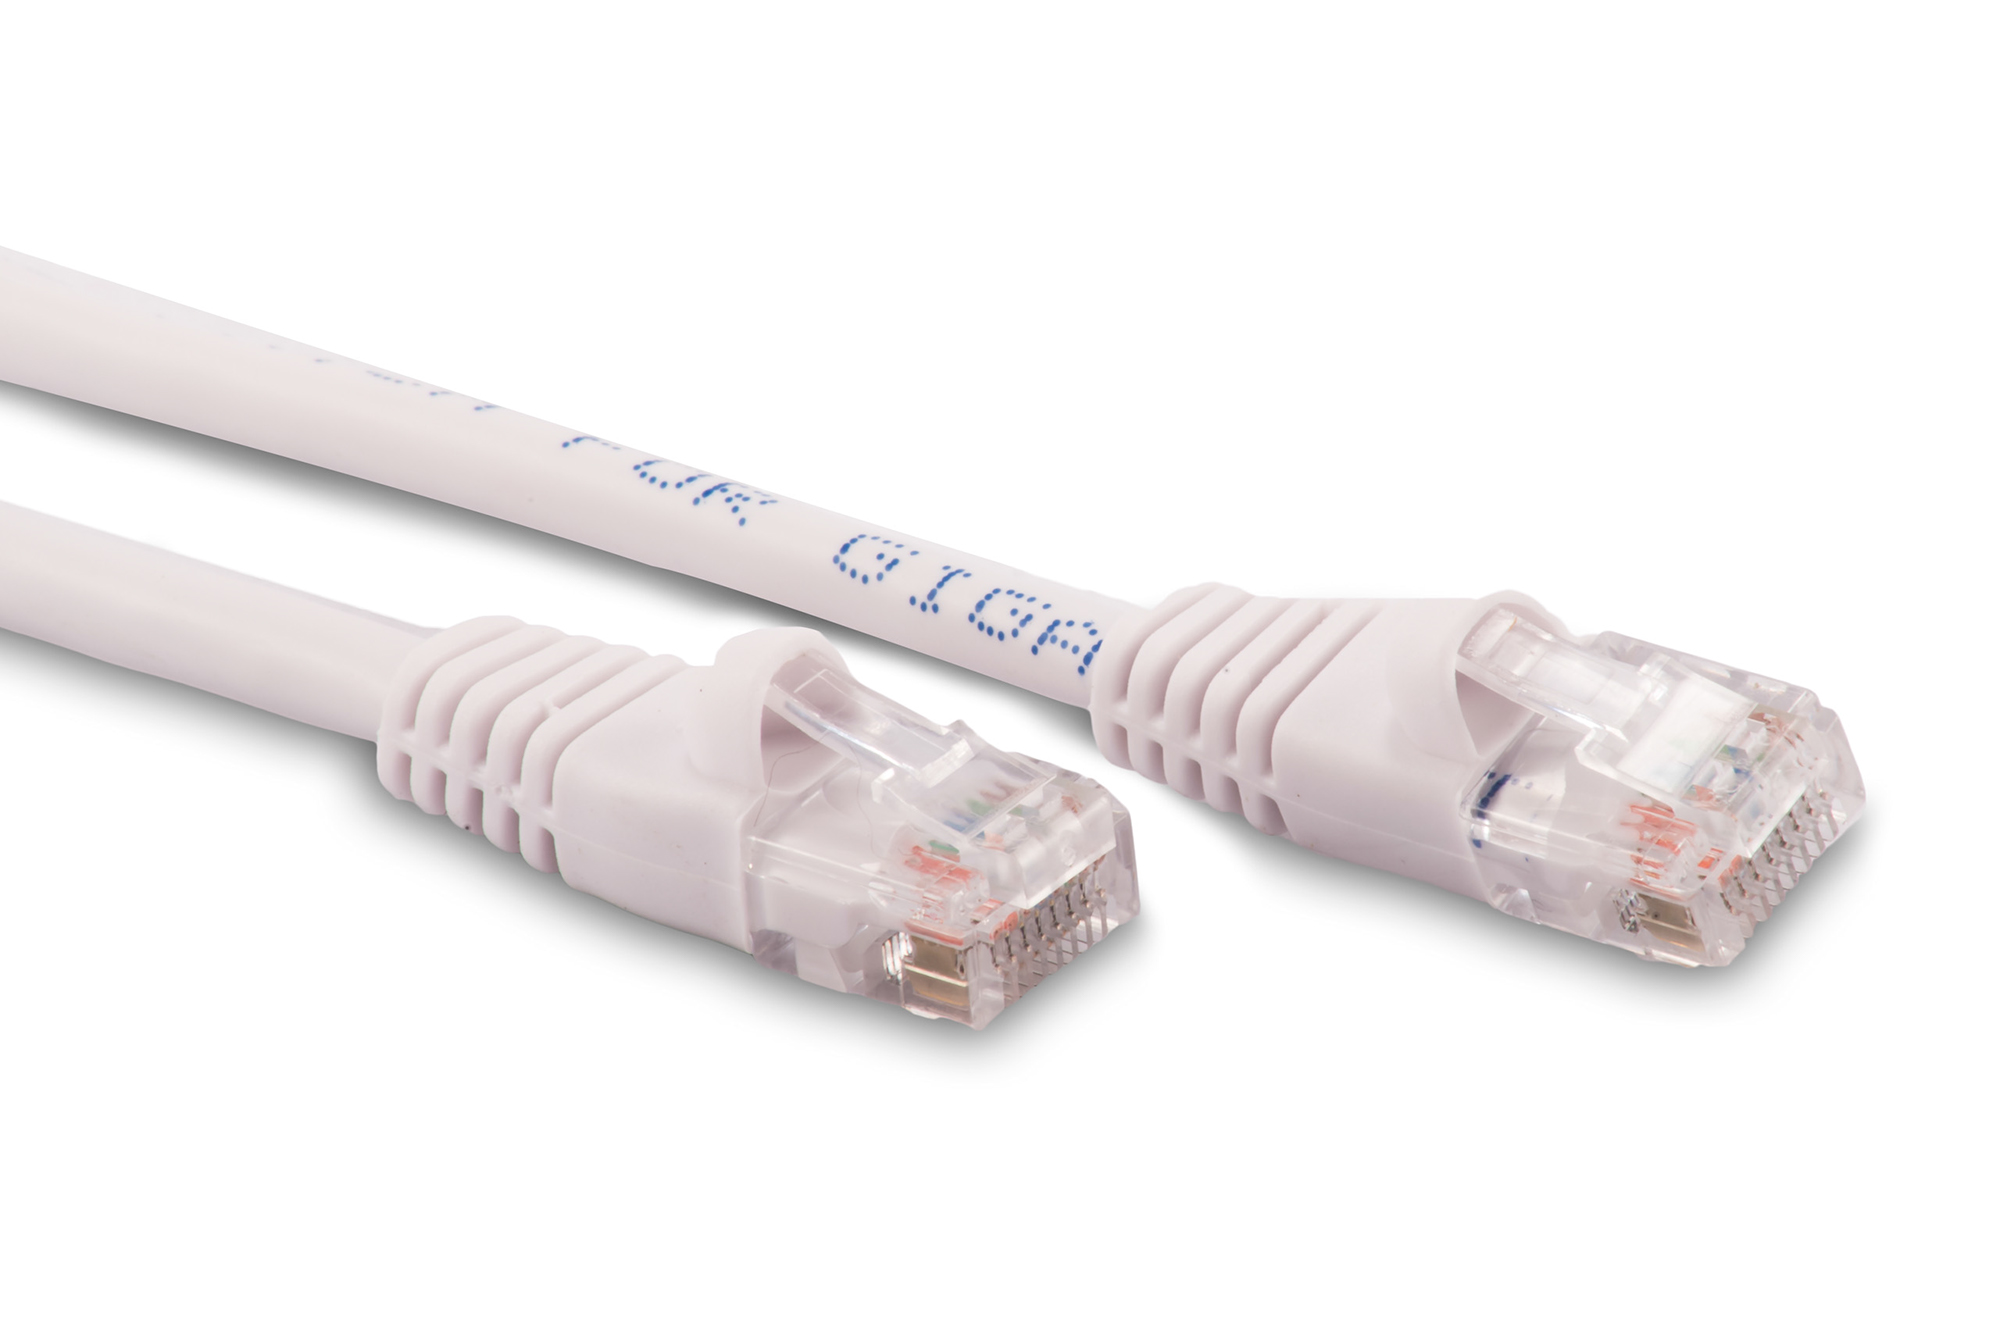 14ft Cat6 Ethernet Patch Cable - White Color - Snagless Boot, Stranded, RJ45, 550Mhz, 24AWG